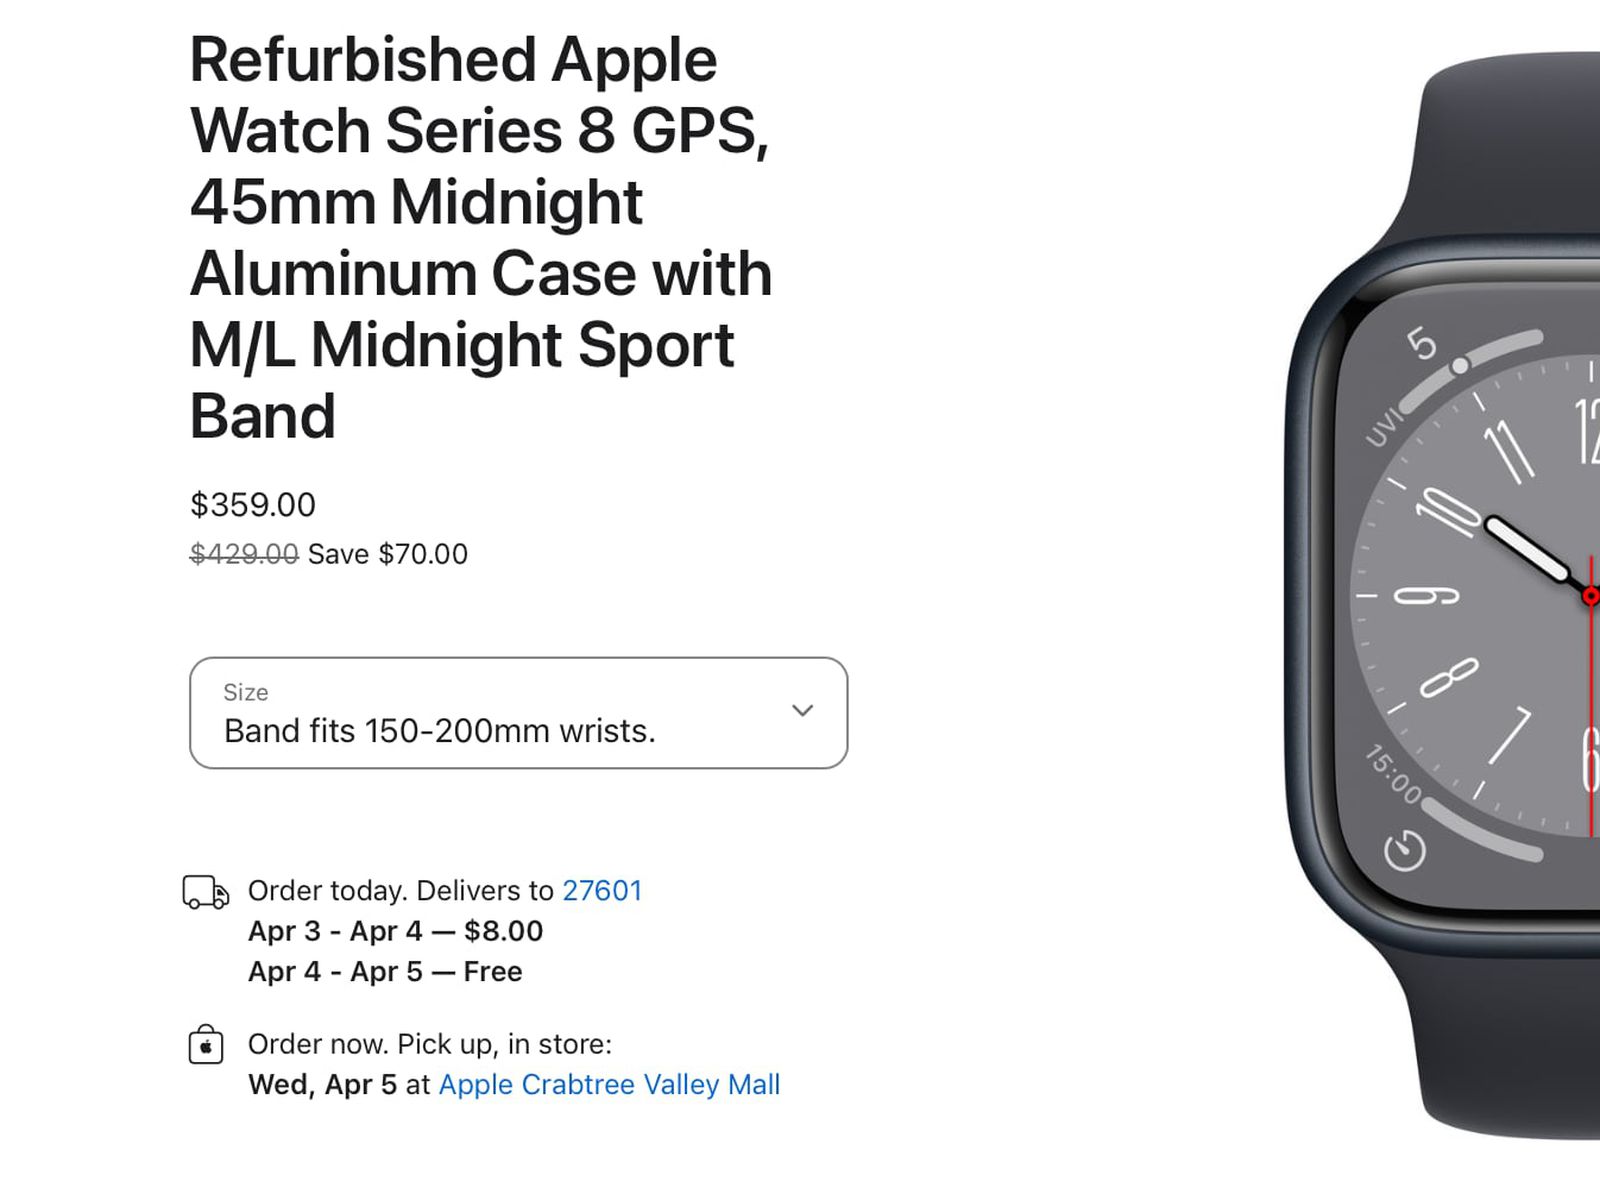 Refurbished Apple Watch Series 8 and Apple Watch SE 2 Models Now Available  From Apple - MacRumors